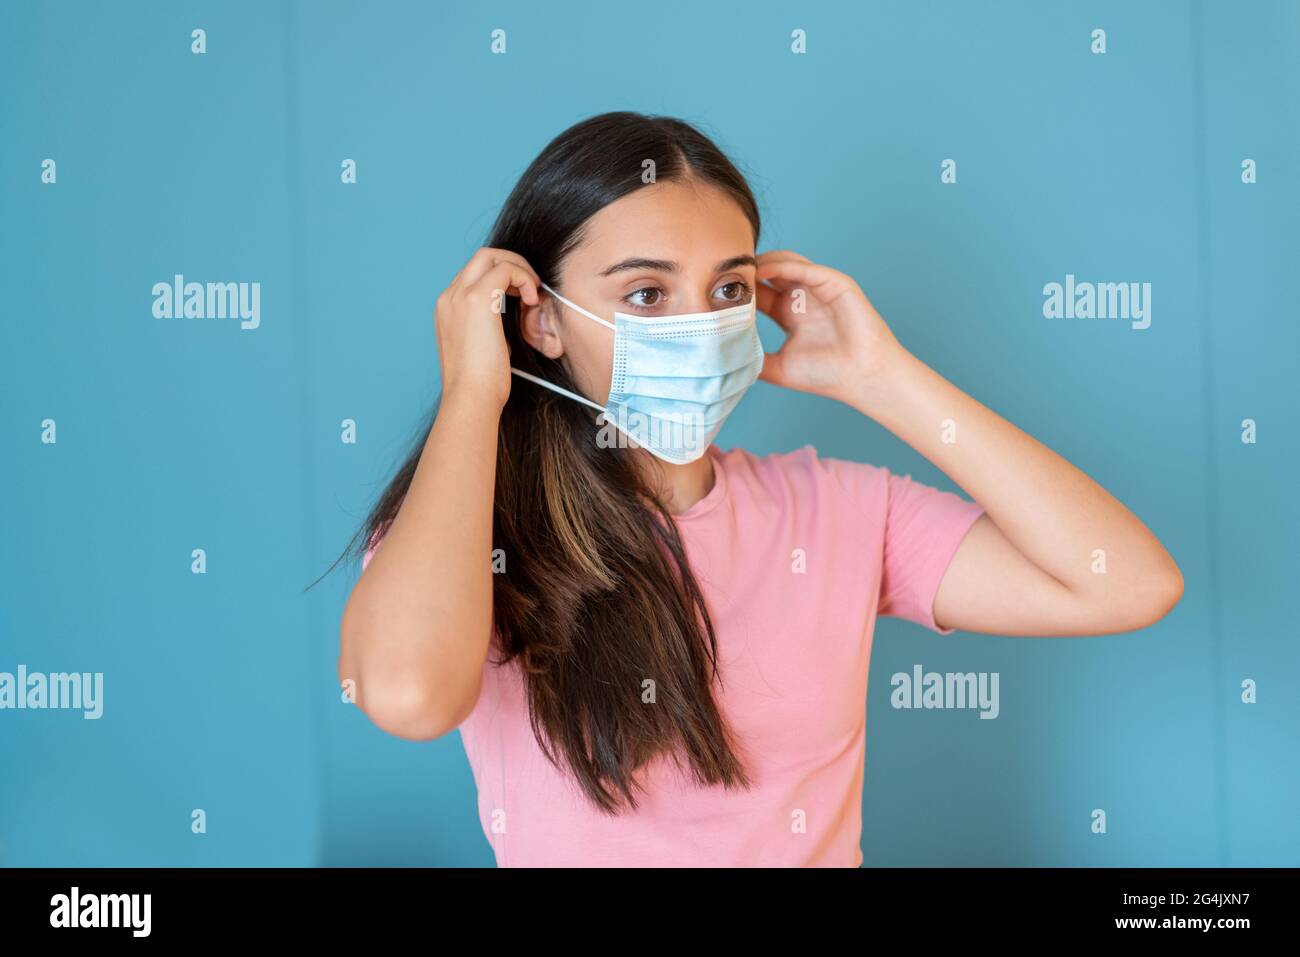 Young teenage girl wearing a disposable face mask placing the elastic behind her ears during the Covid-19 pandemic Stock Photo